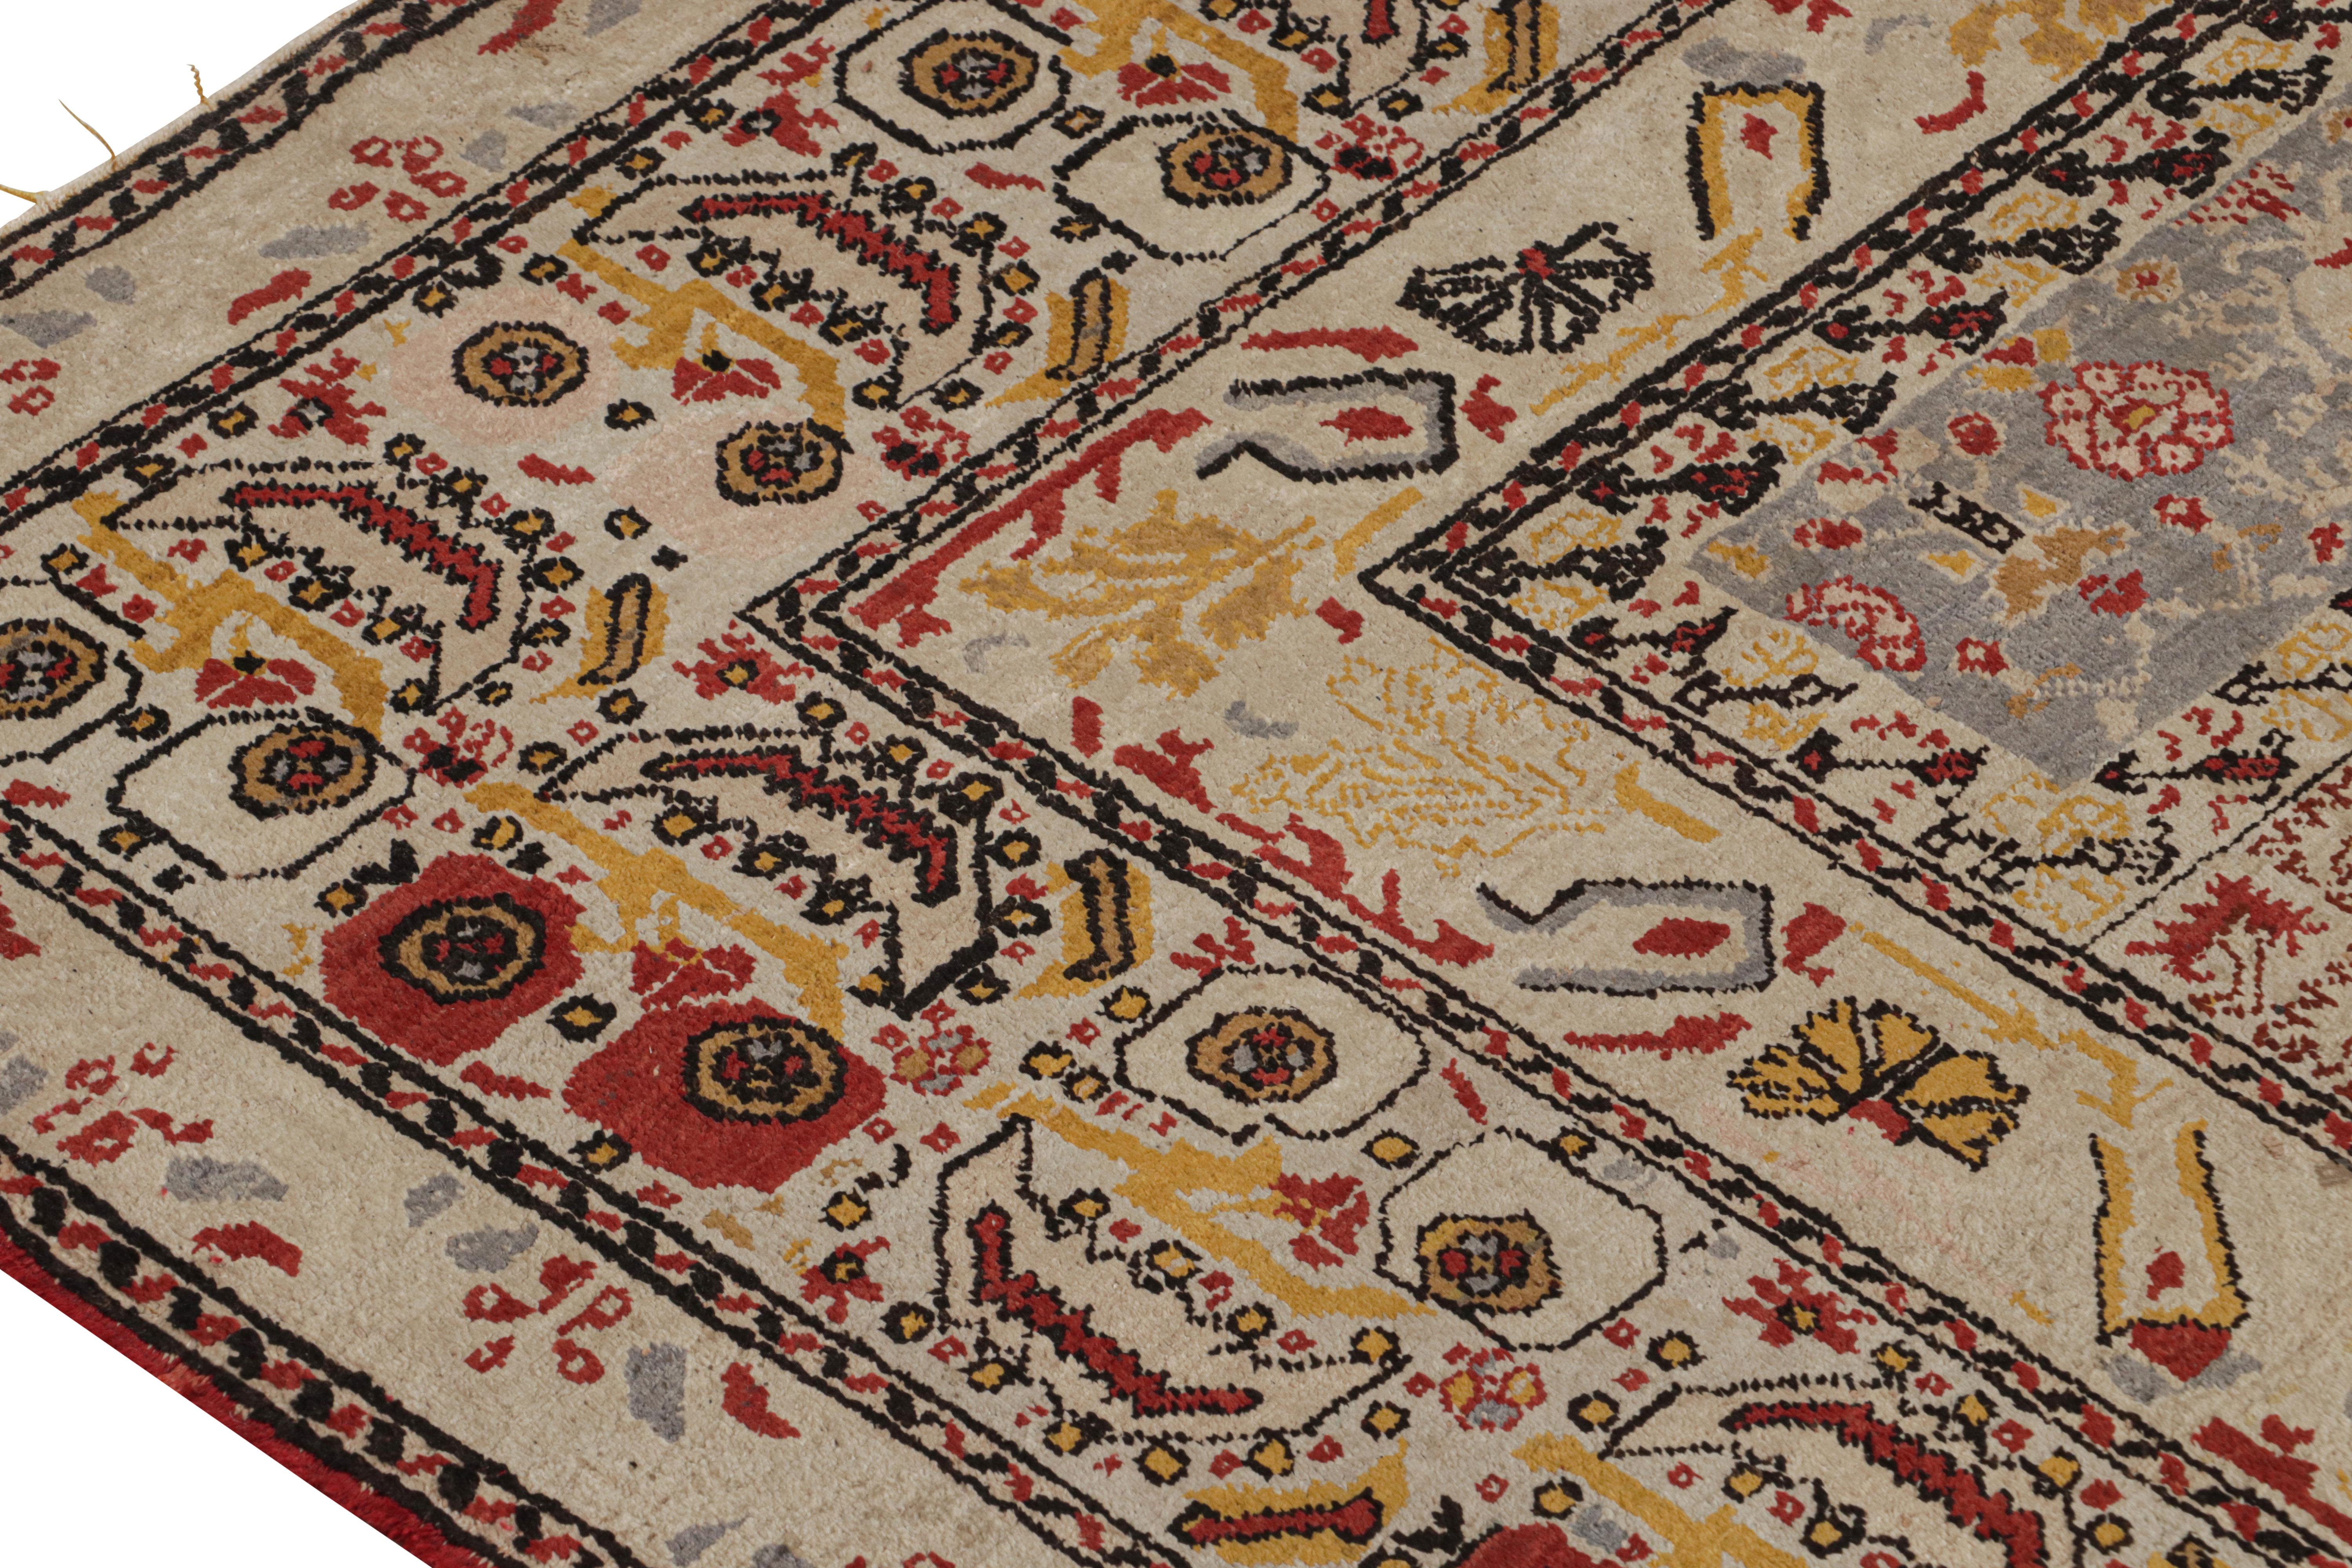 Early 17th Century Vintage Zeki Müren Runner Rug with Floral Patterns, from Rug & Kilim For Sale